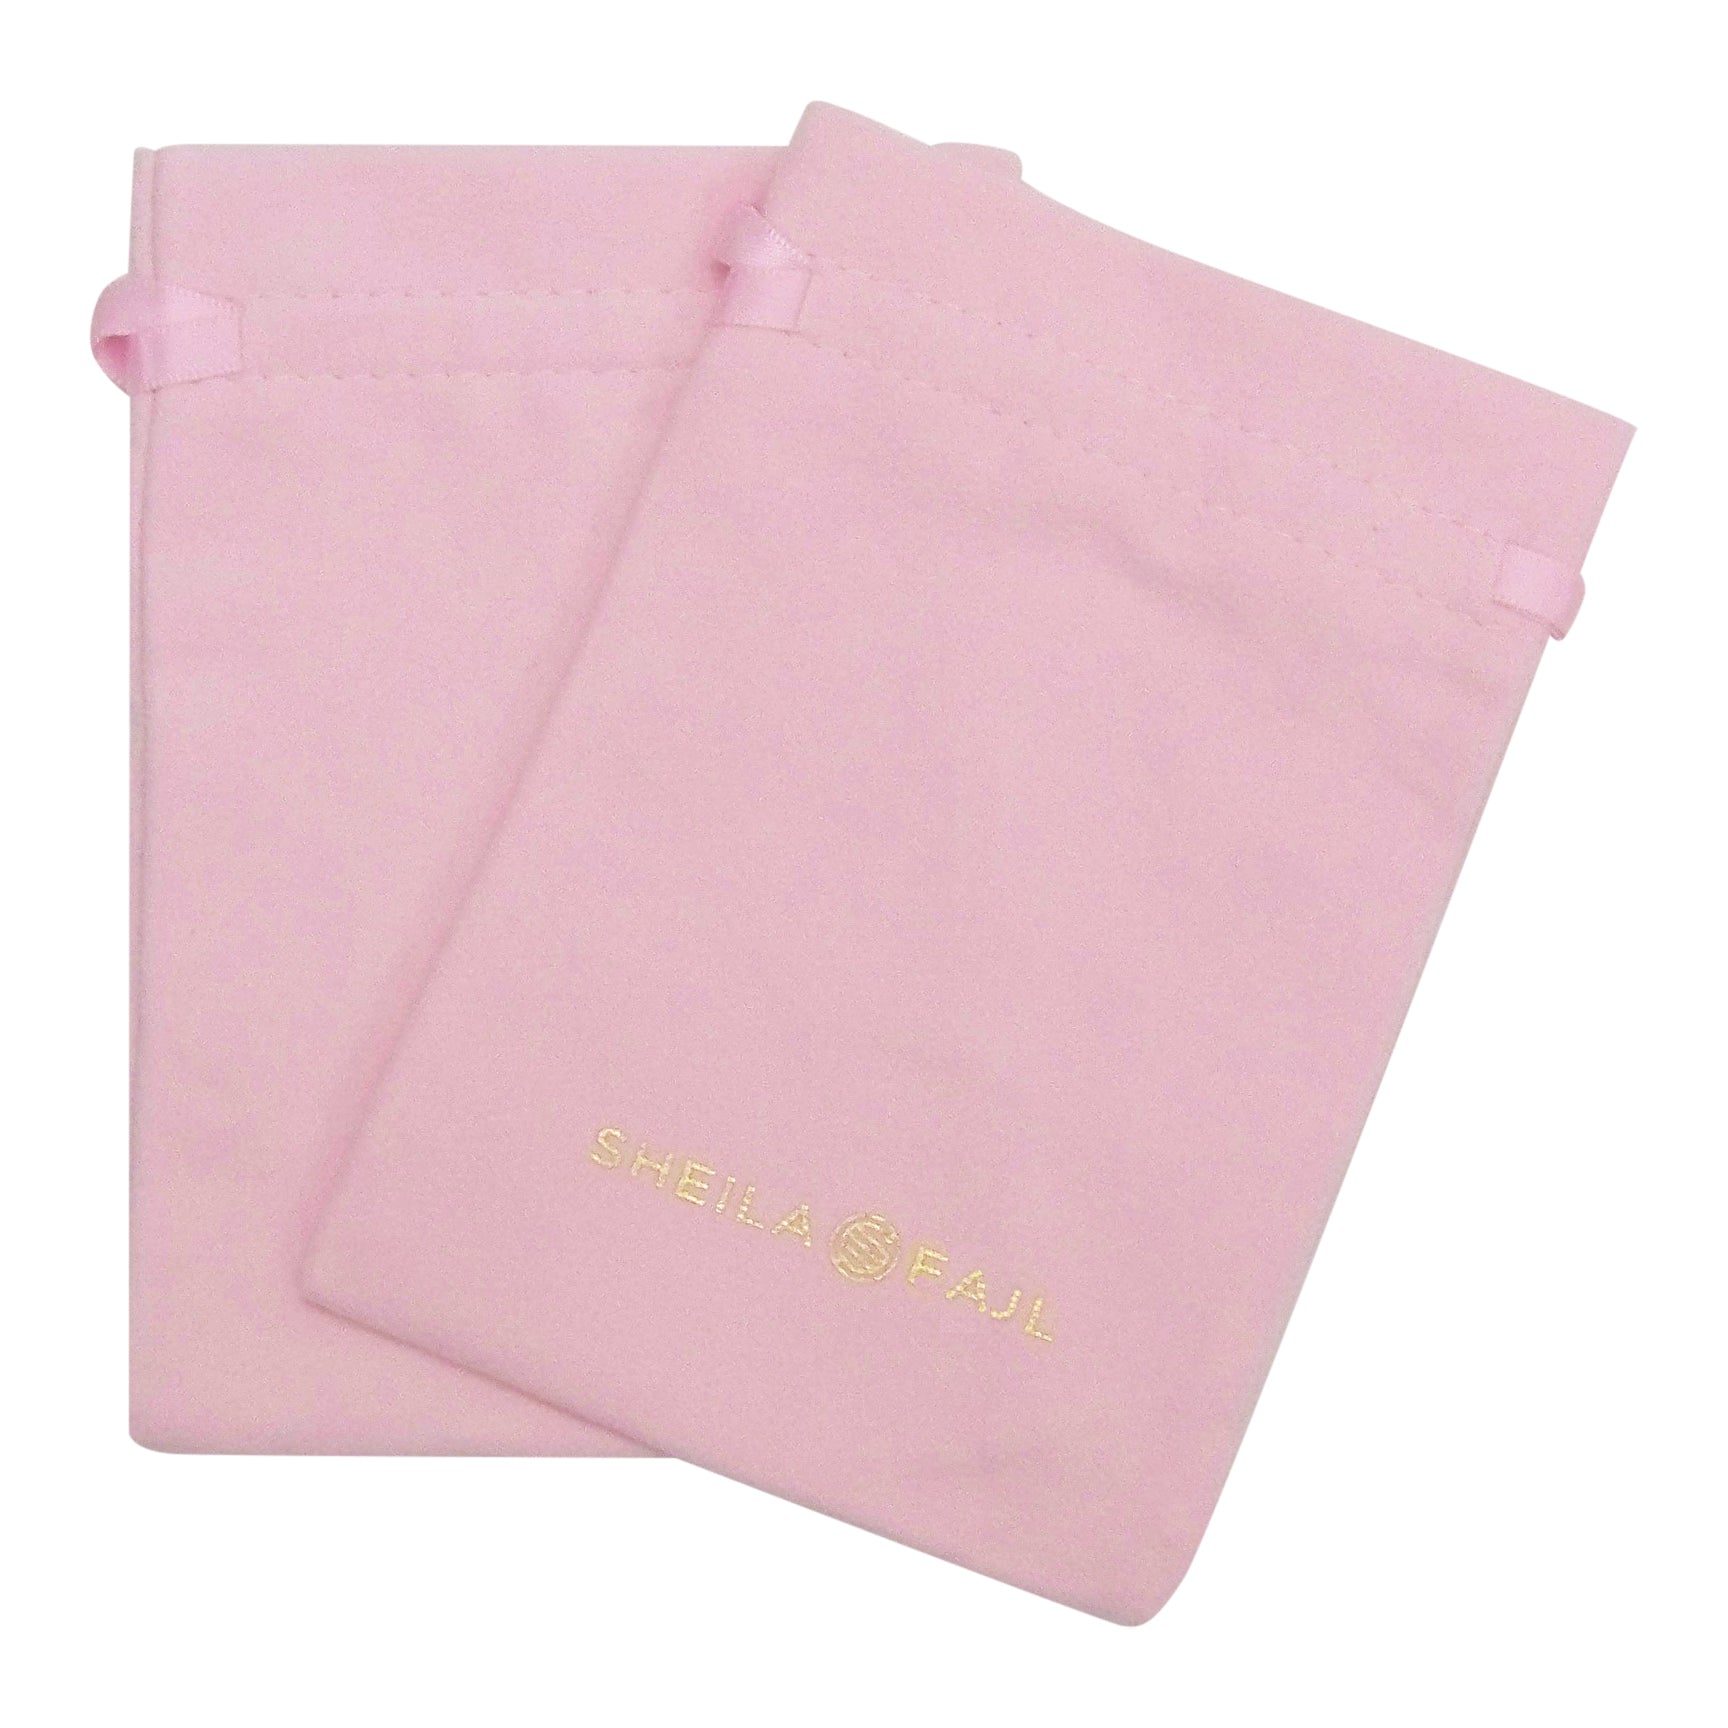 image of sheila fajl pink pouch jewelry bags